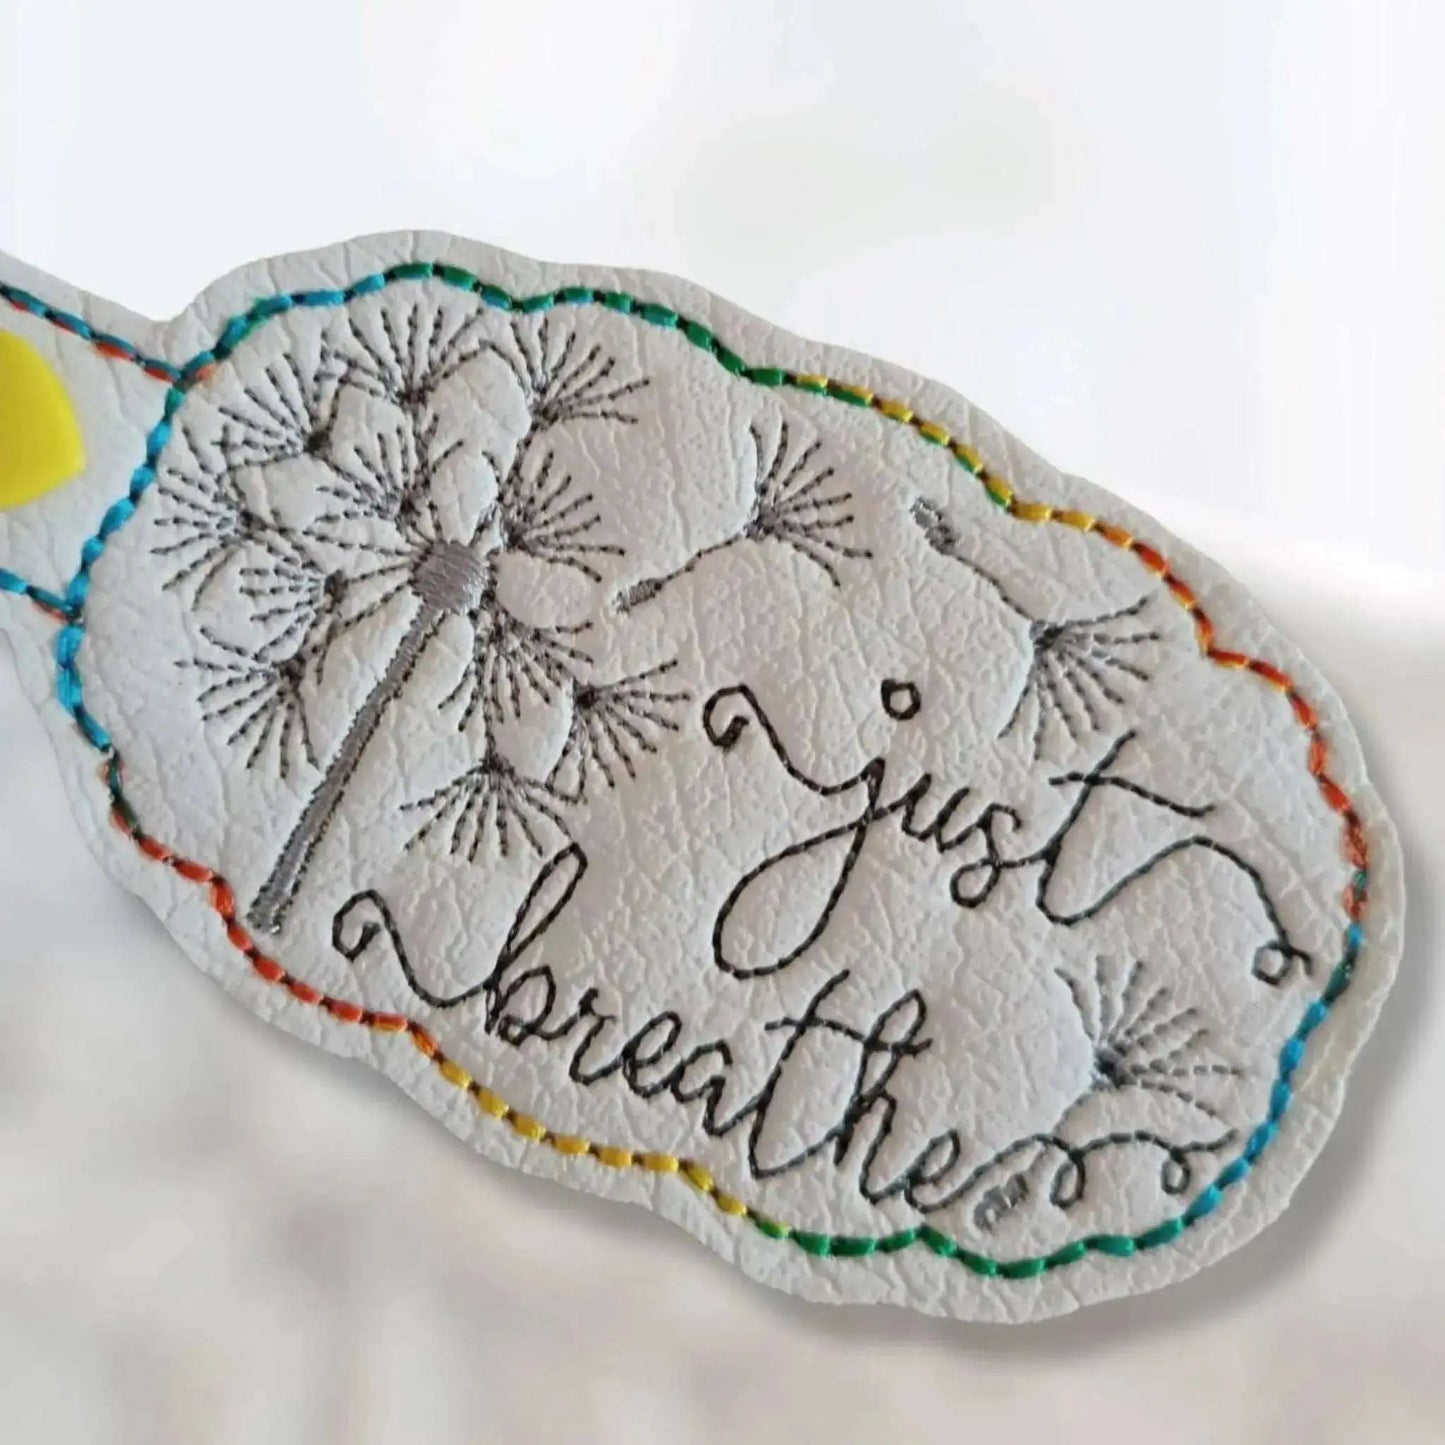 Just breathe vinyl key chain, colour options, ready to post, made in Australia - Lil-aiges Creations - Quality Australian-made Gifts